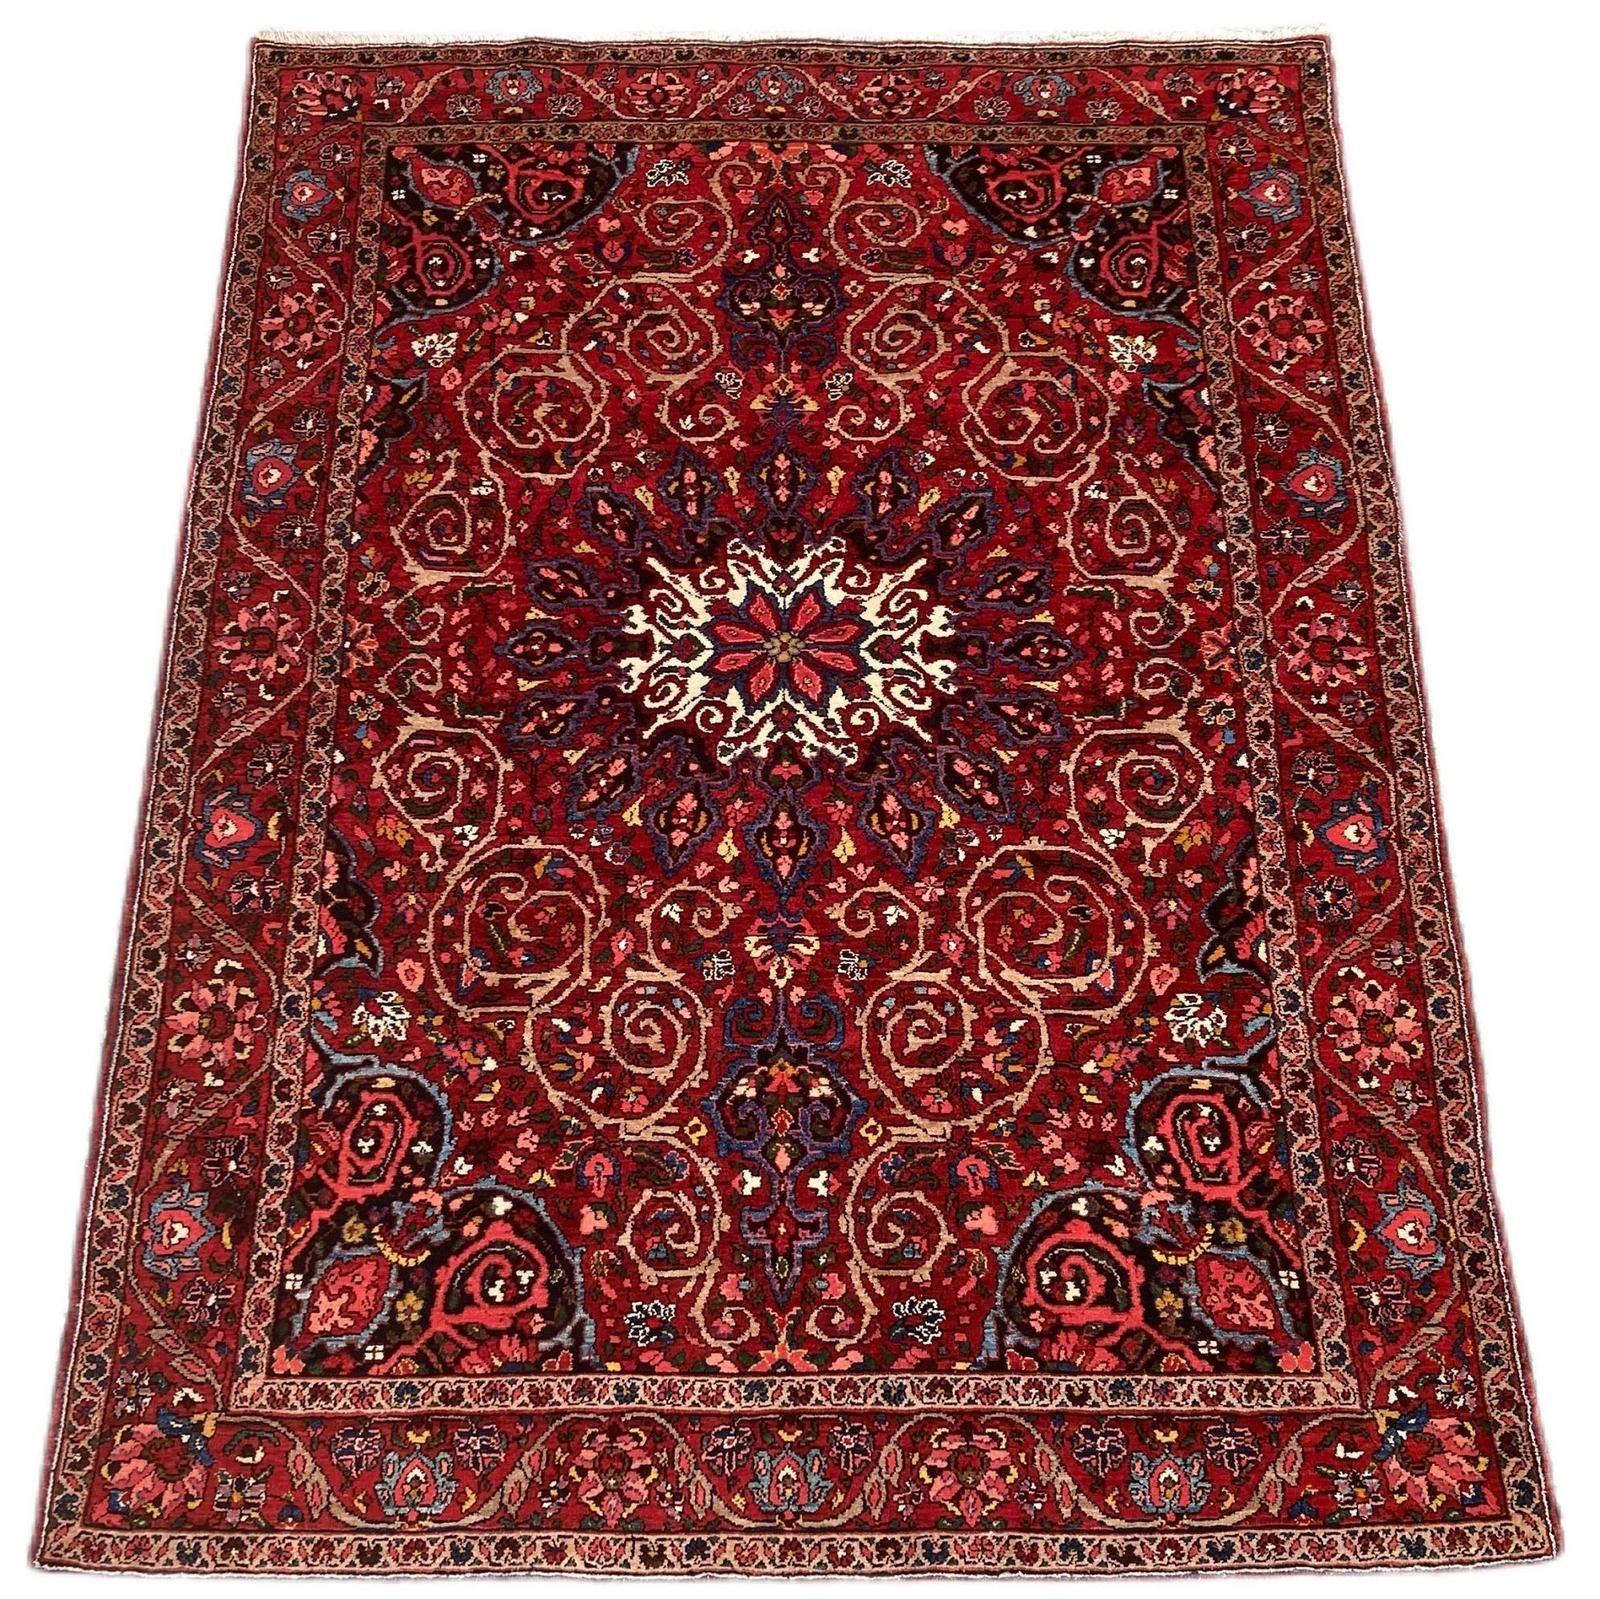 A lovely antique Bakhtiar rug, handwoven circa 1920 with a circular medallion on a terracotta red field and similar border. Lovely wool quality and stunning colours!
Size: 2.12m x 1.59m (7ft x 5ft 3in)
This rug is in good, original condition with